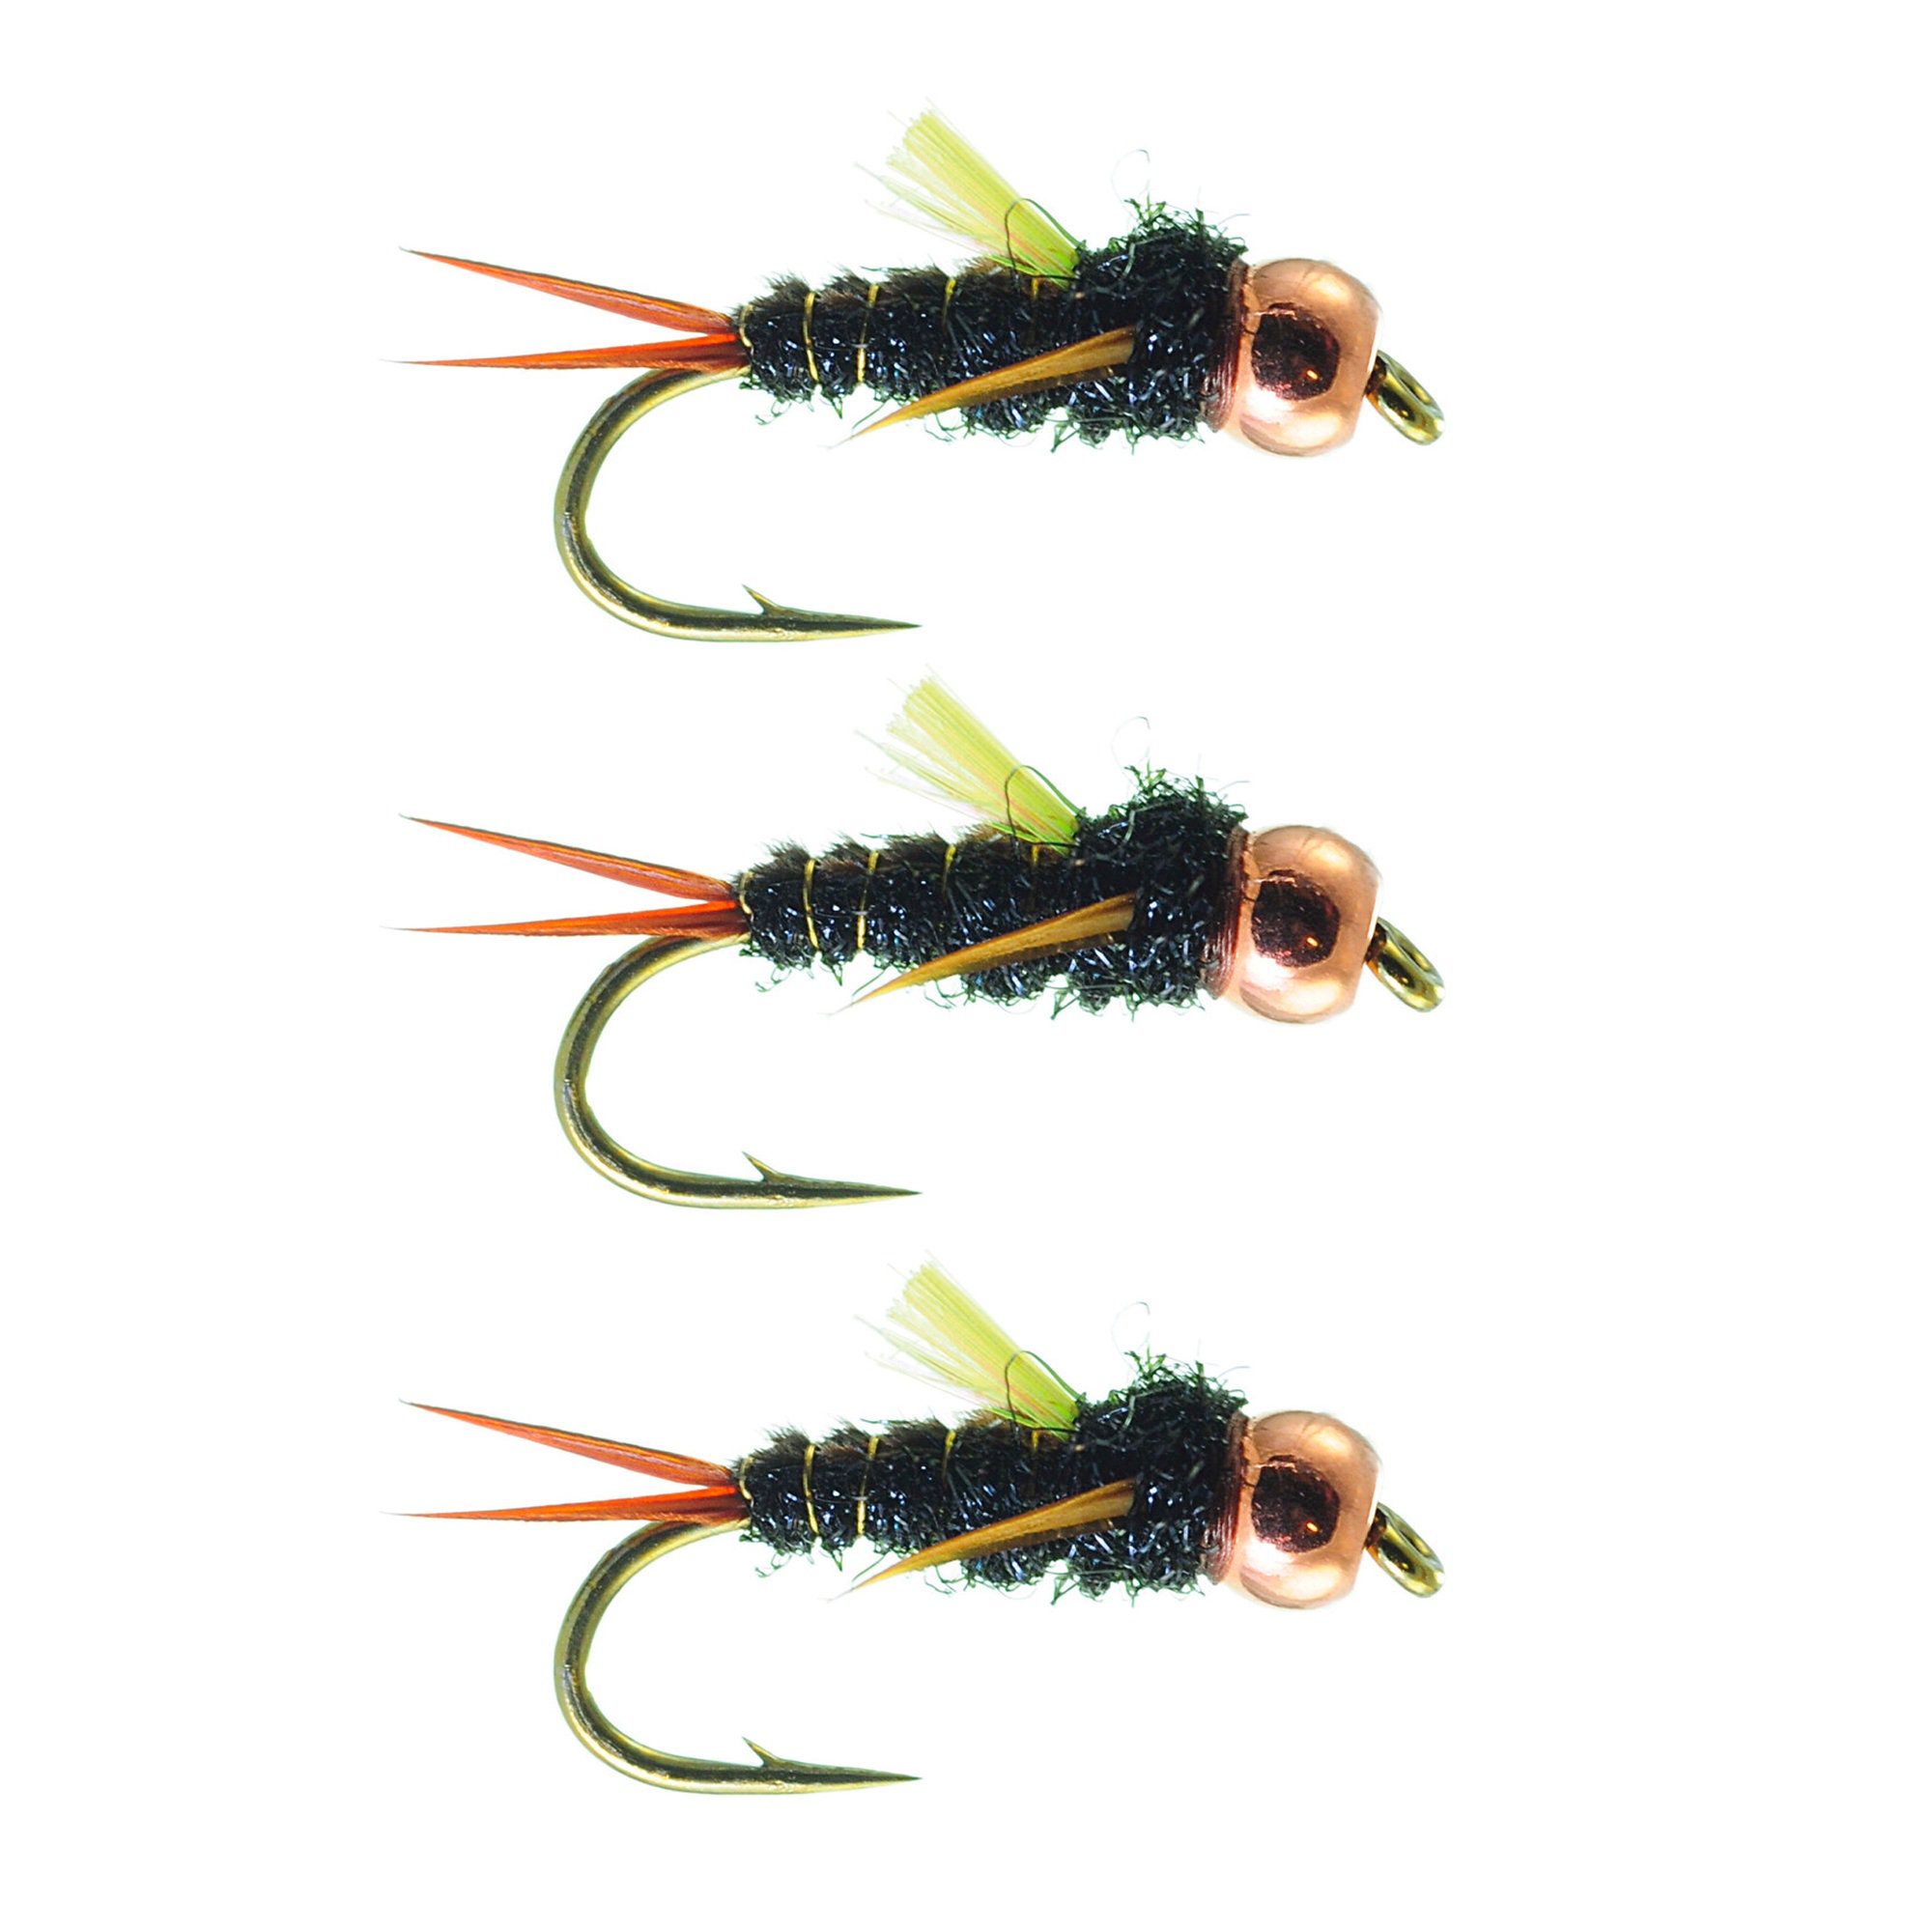 Fly Fishing Flies for Trout Black Prince Psycho Darklord Variant Prince  Nymph Bead Head Prince Nymph Fly 3 Pack of Lures 